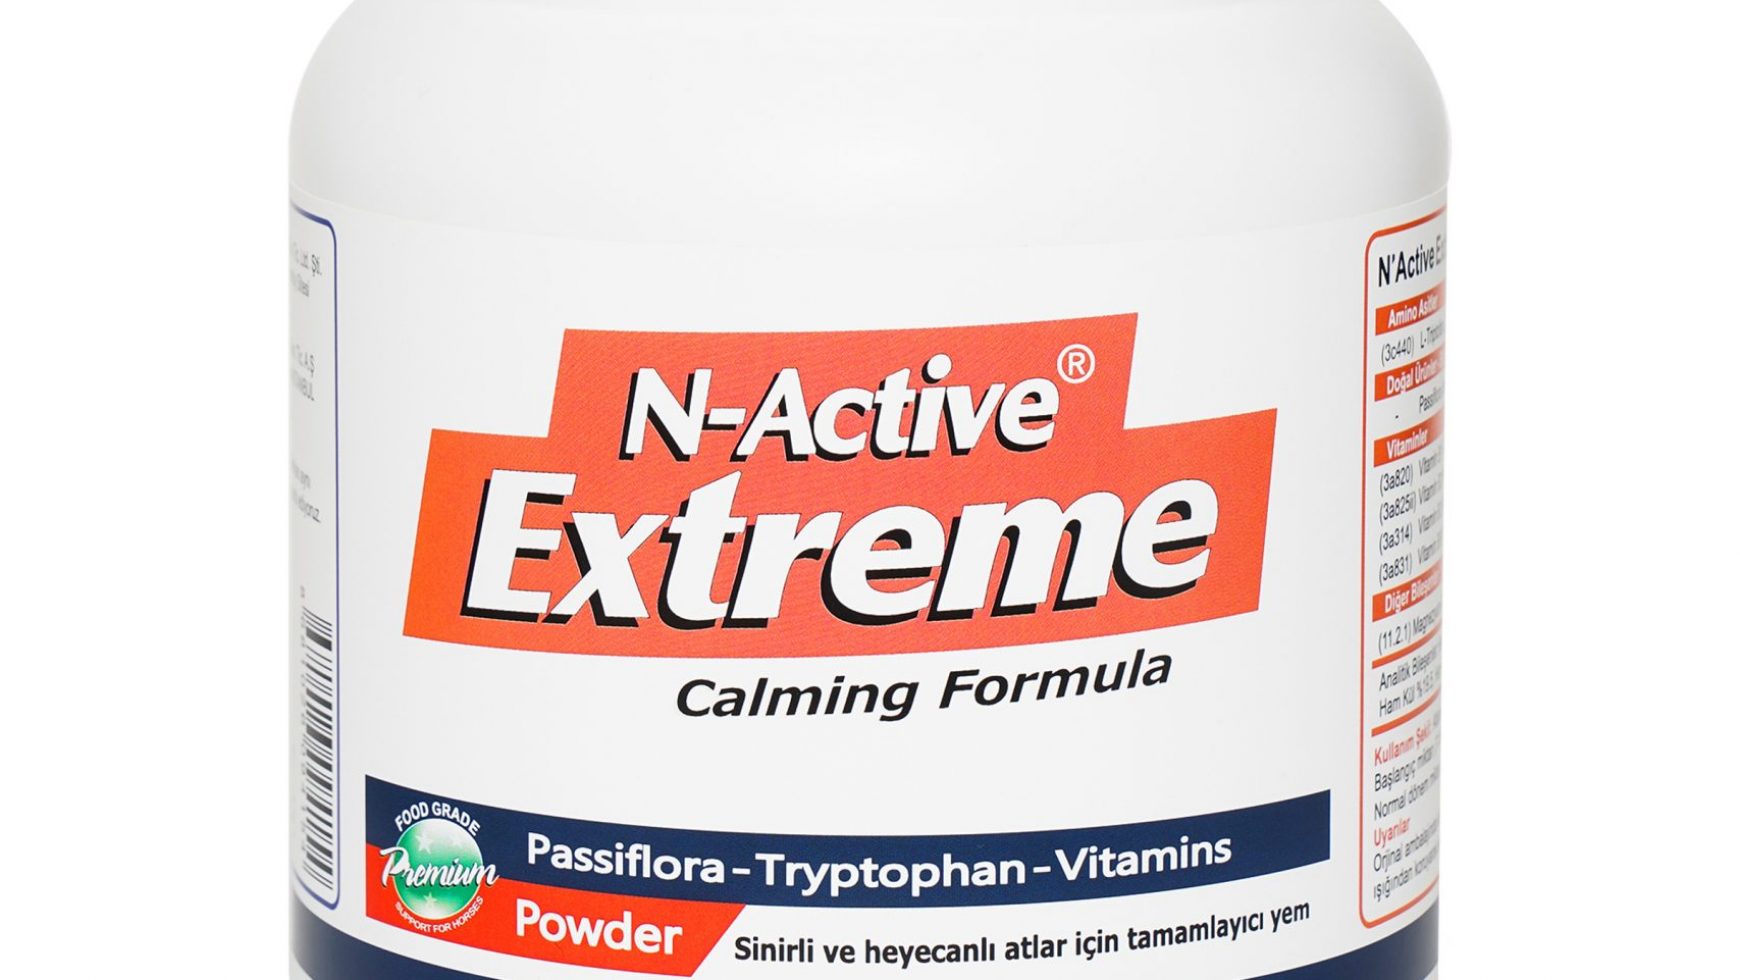 N-ACTIVE EXTREME